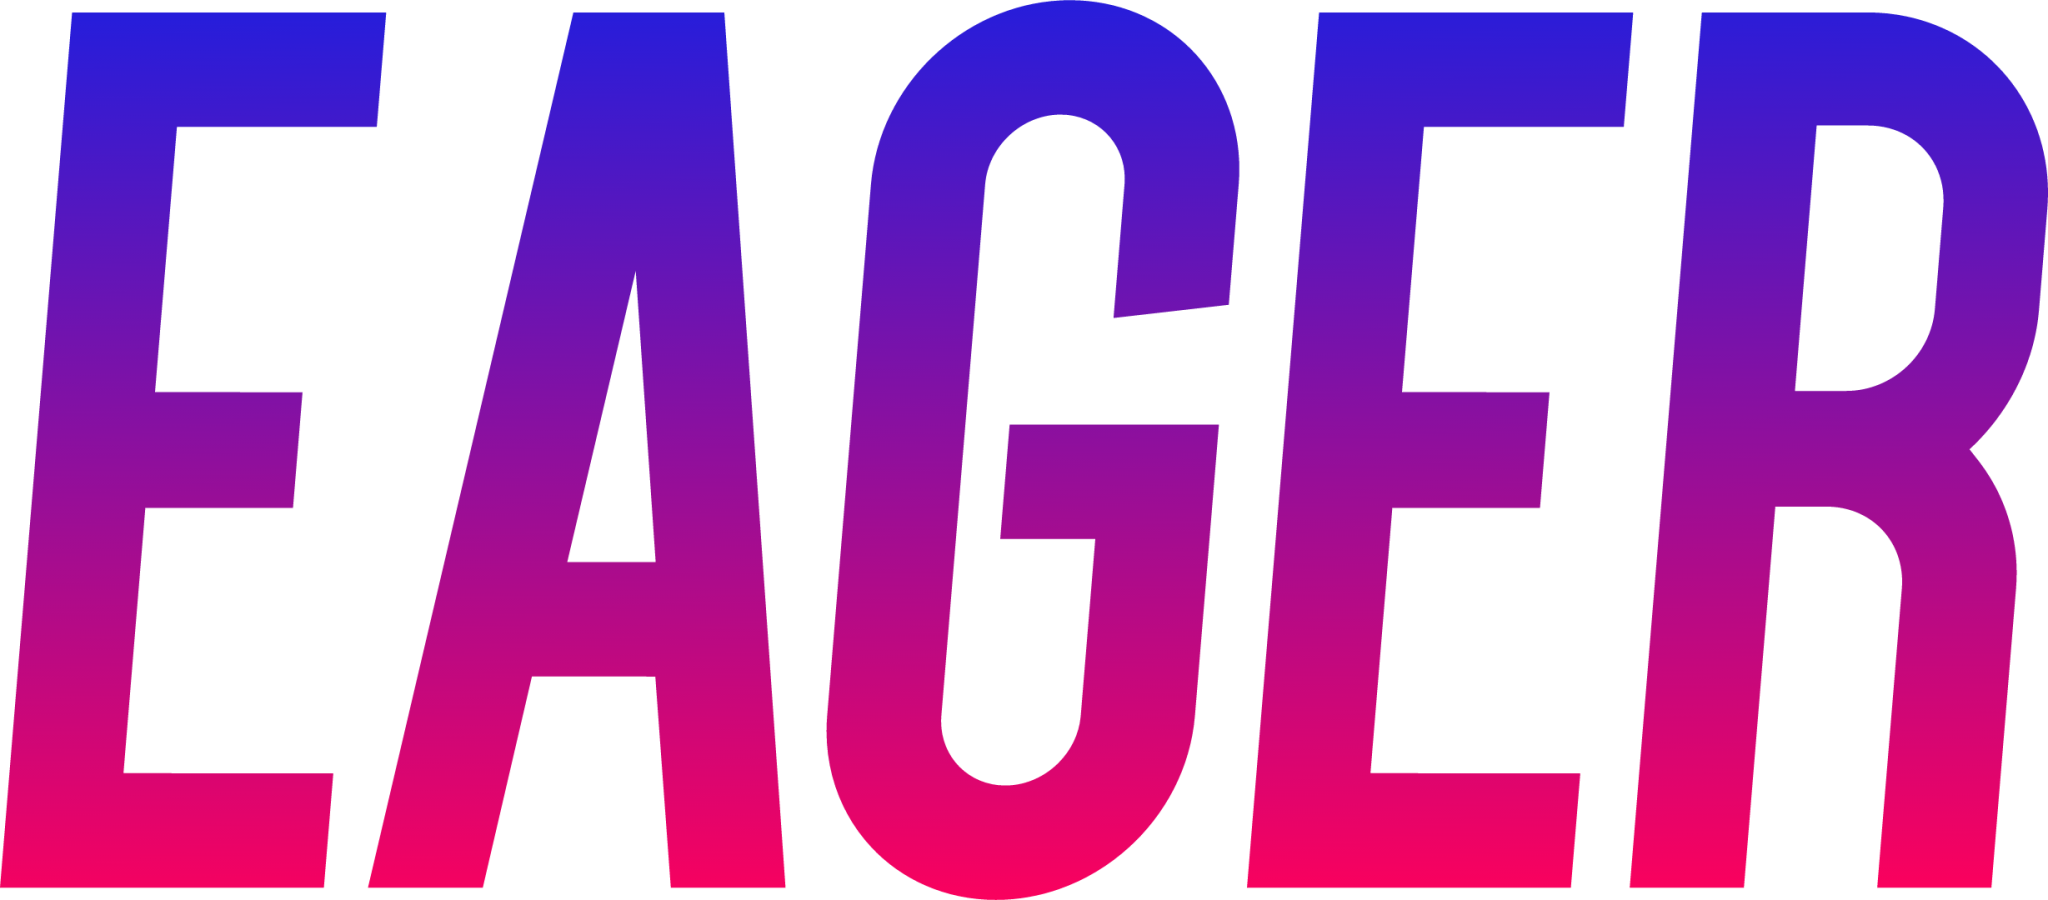 Eager icon